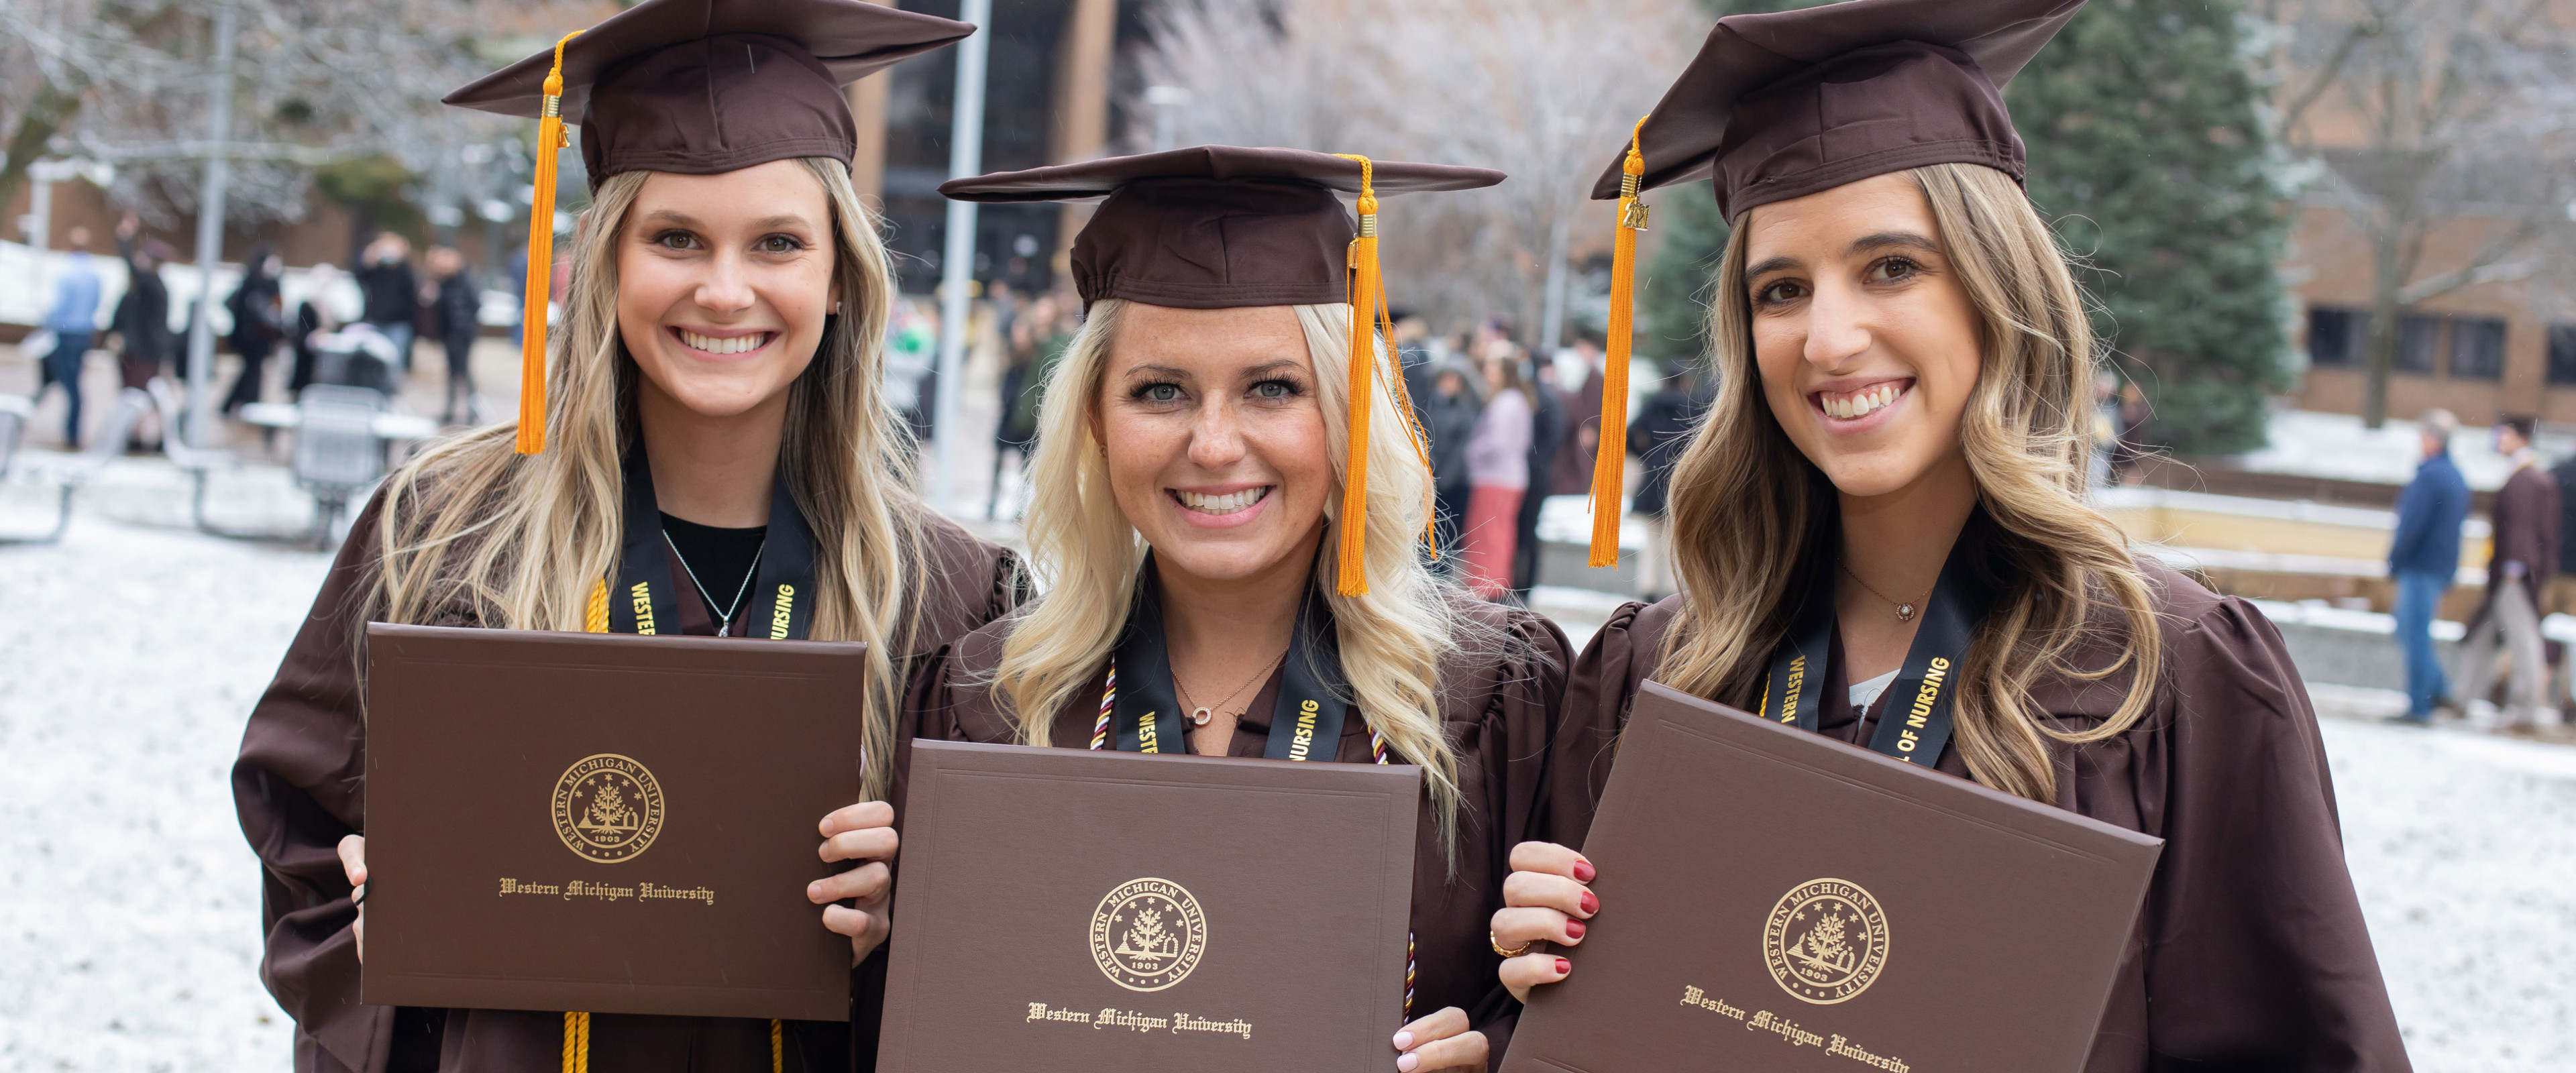 Three women in commencement robes and hats with engineering tassle